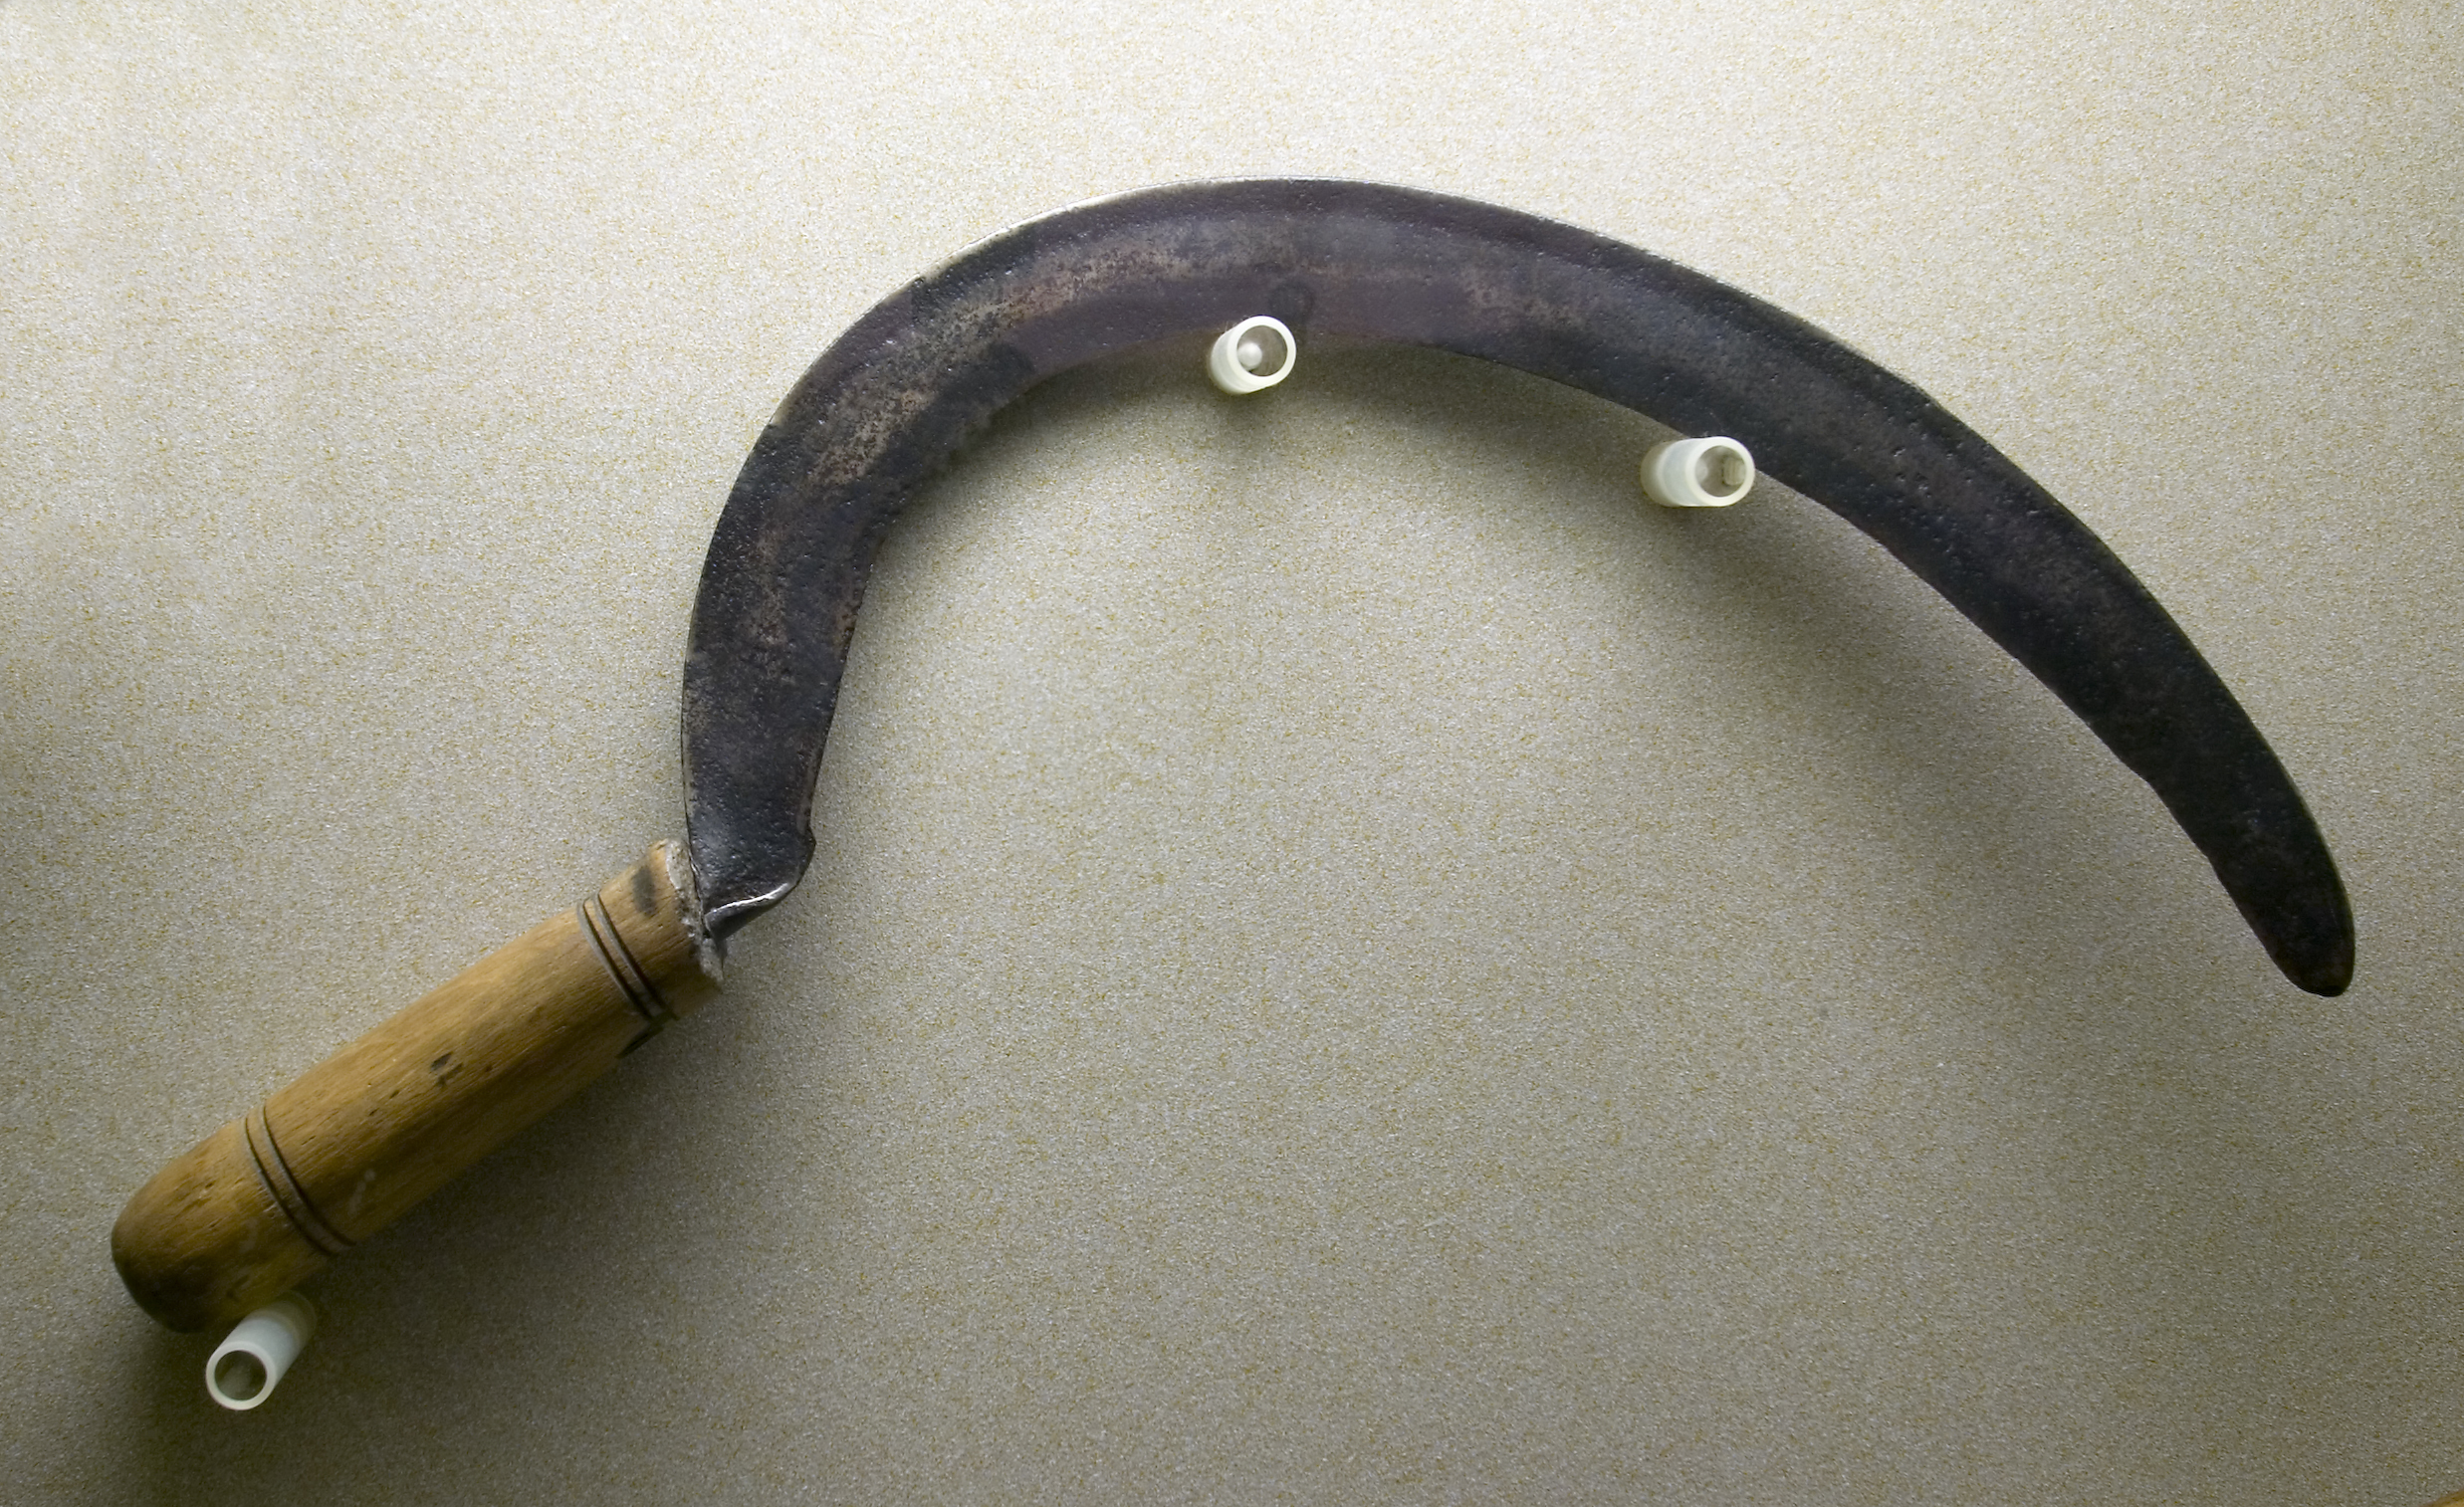 Sickle or reaping hook used to hand harvest cereal crops